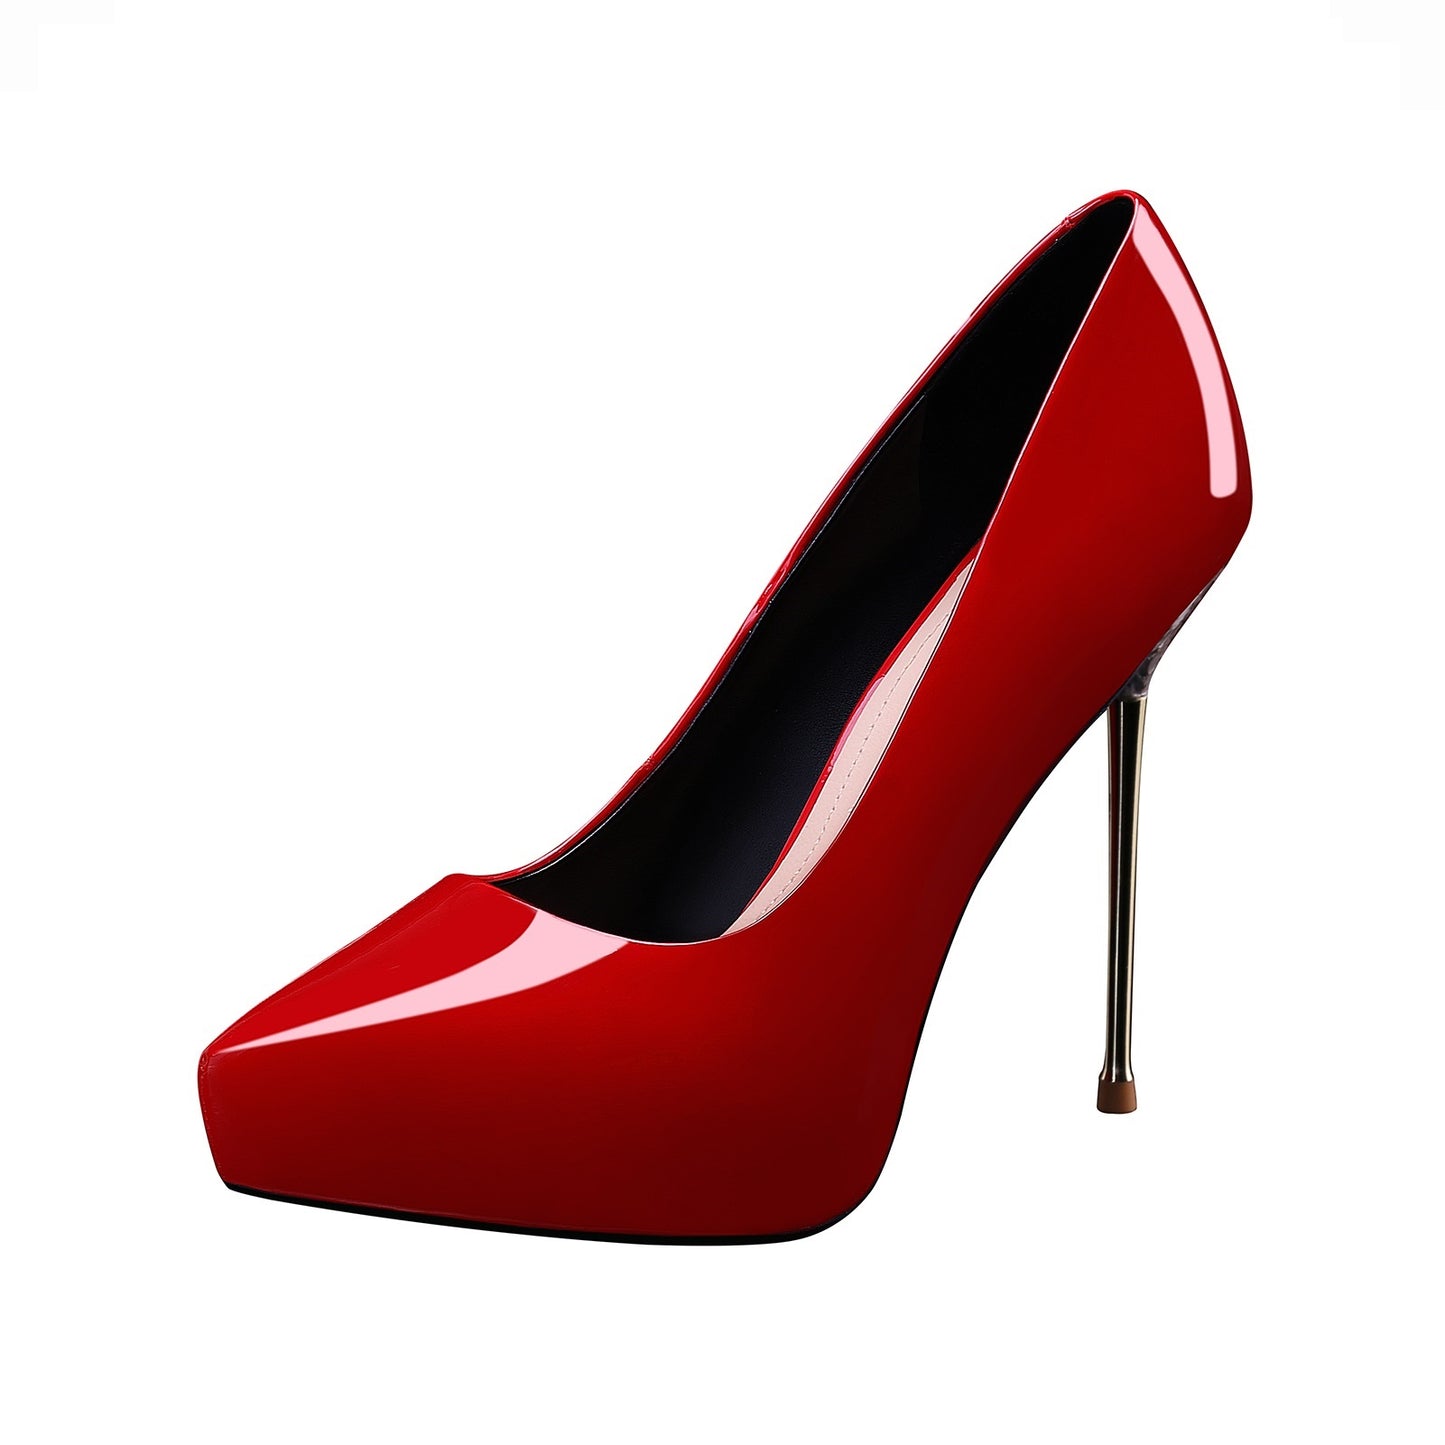 Women's Dressy Comfortable Platform High Heel Pumps Shoes with Patent Leather